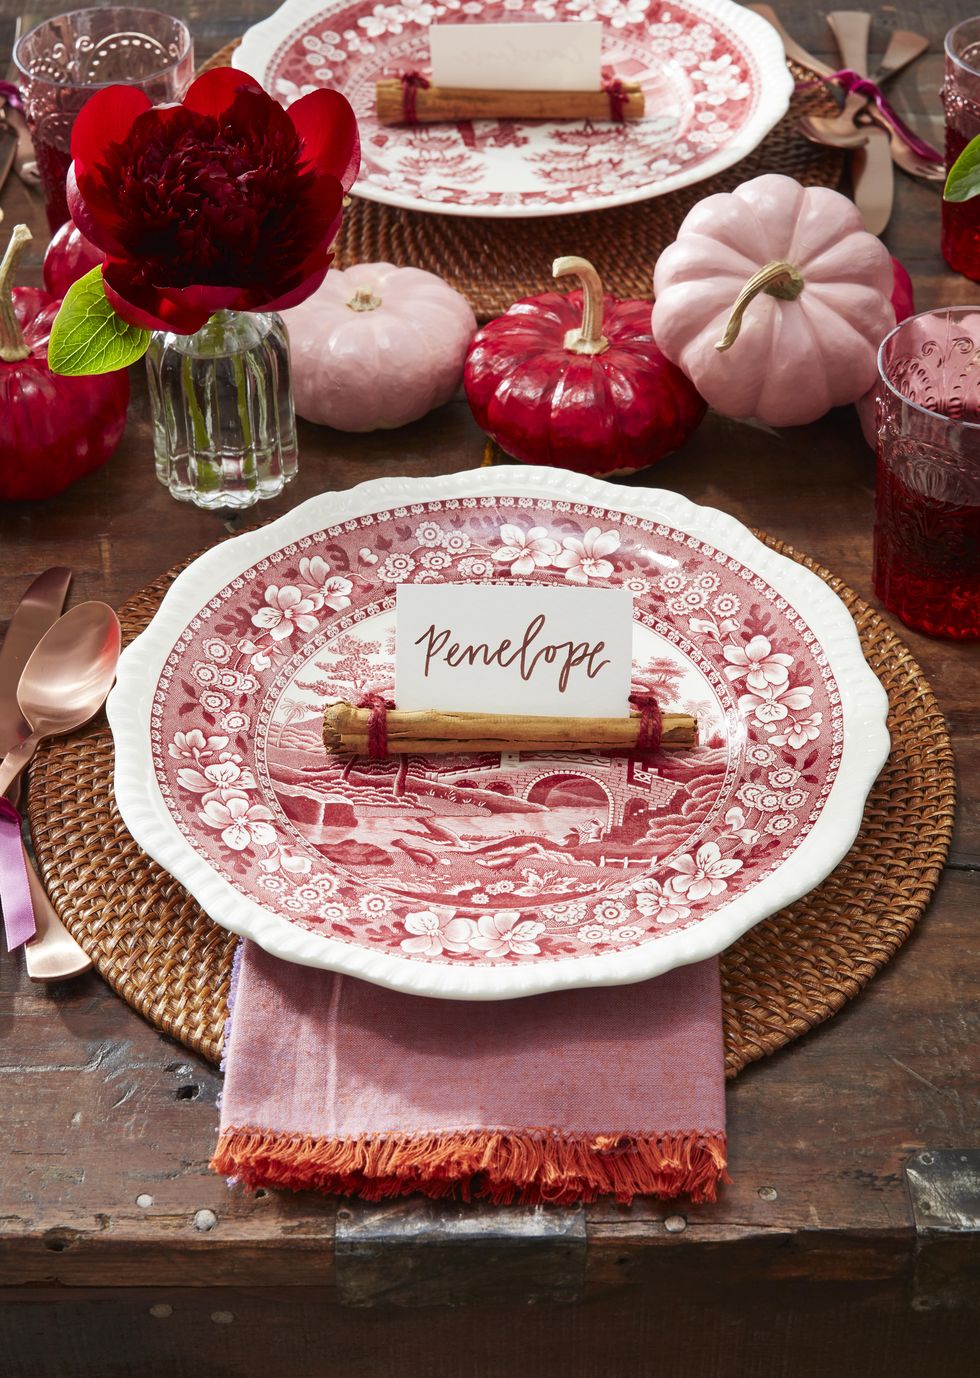 cinnamon stick place card on a red transferware plate